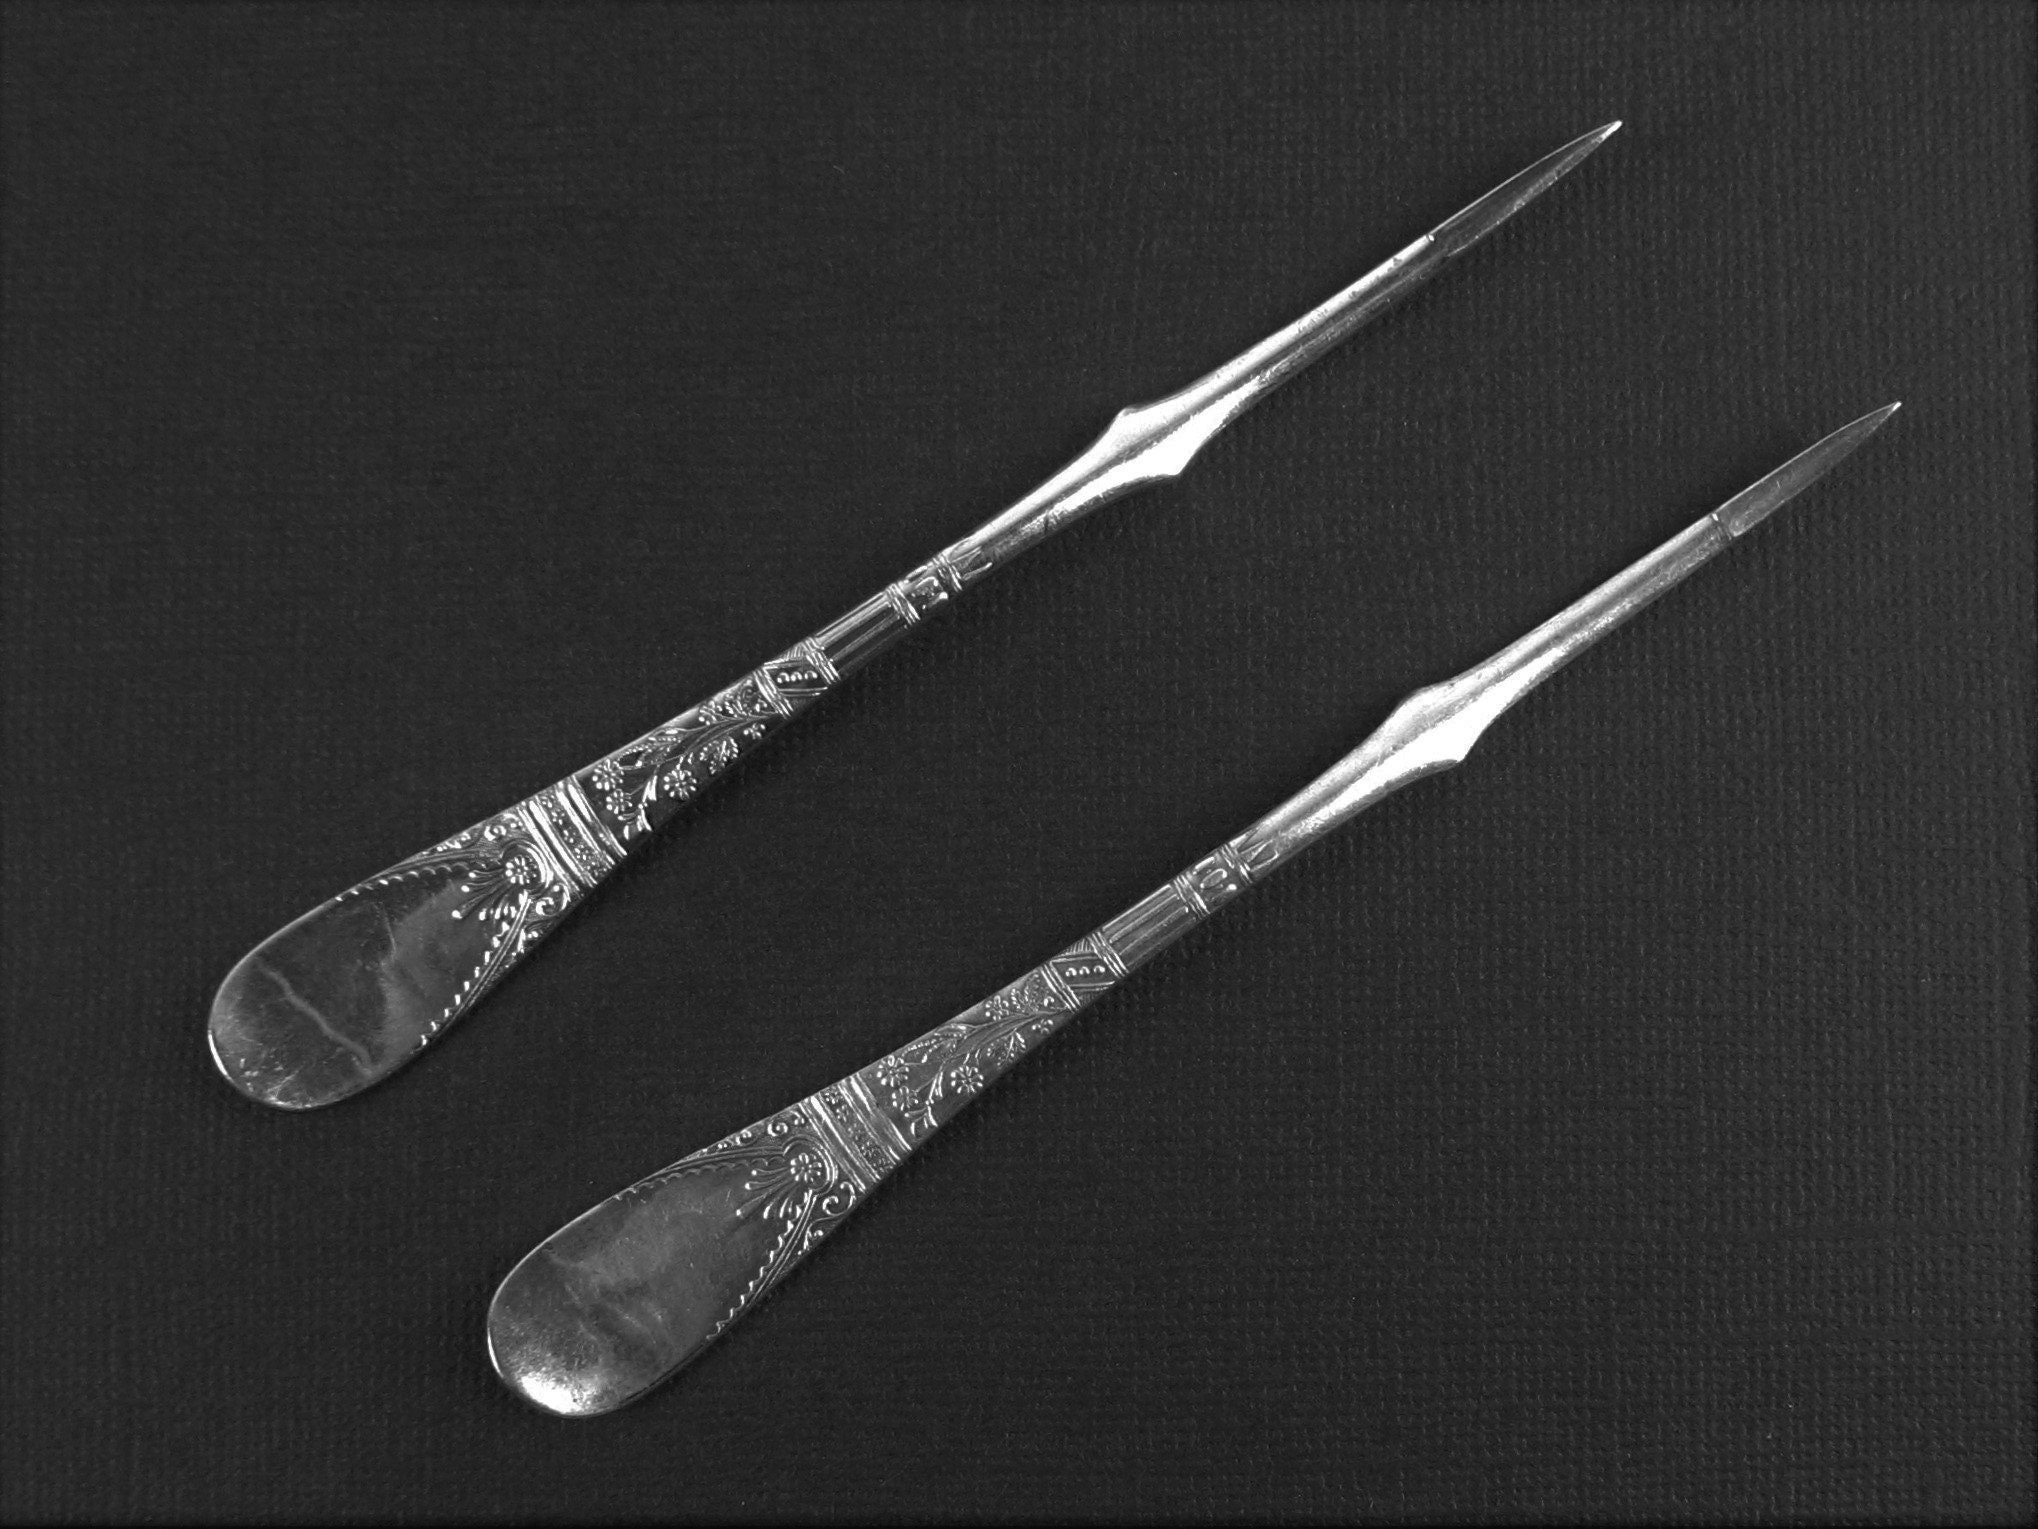 2 X Antique Seafood/Nut Picks Lorne 1878 Pattern Made By Rogers Silverplate Vintage Silver